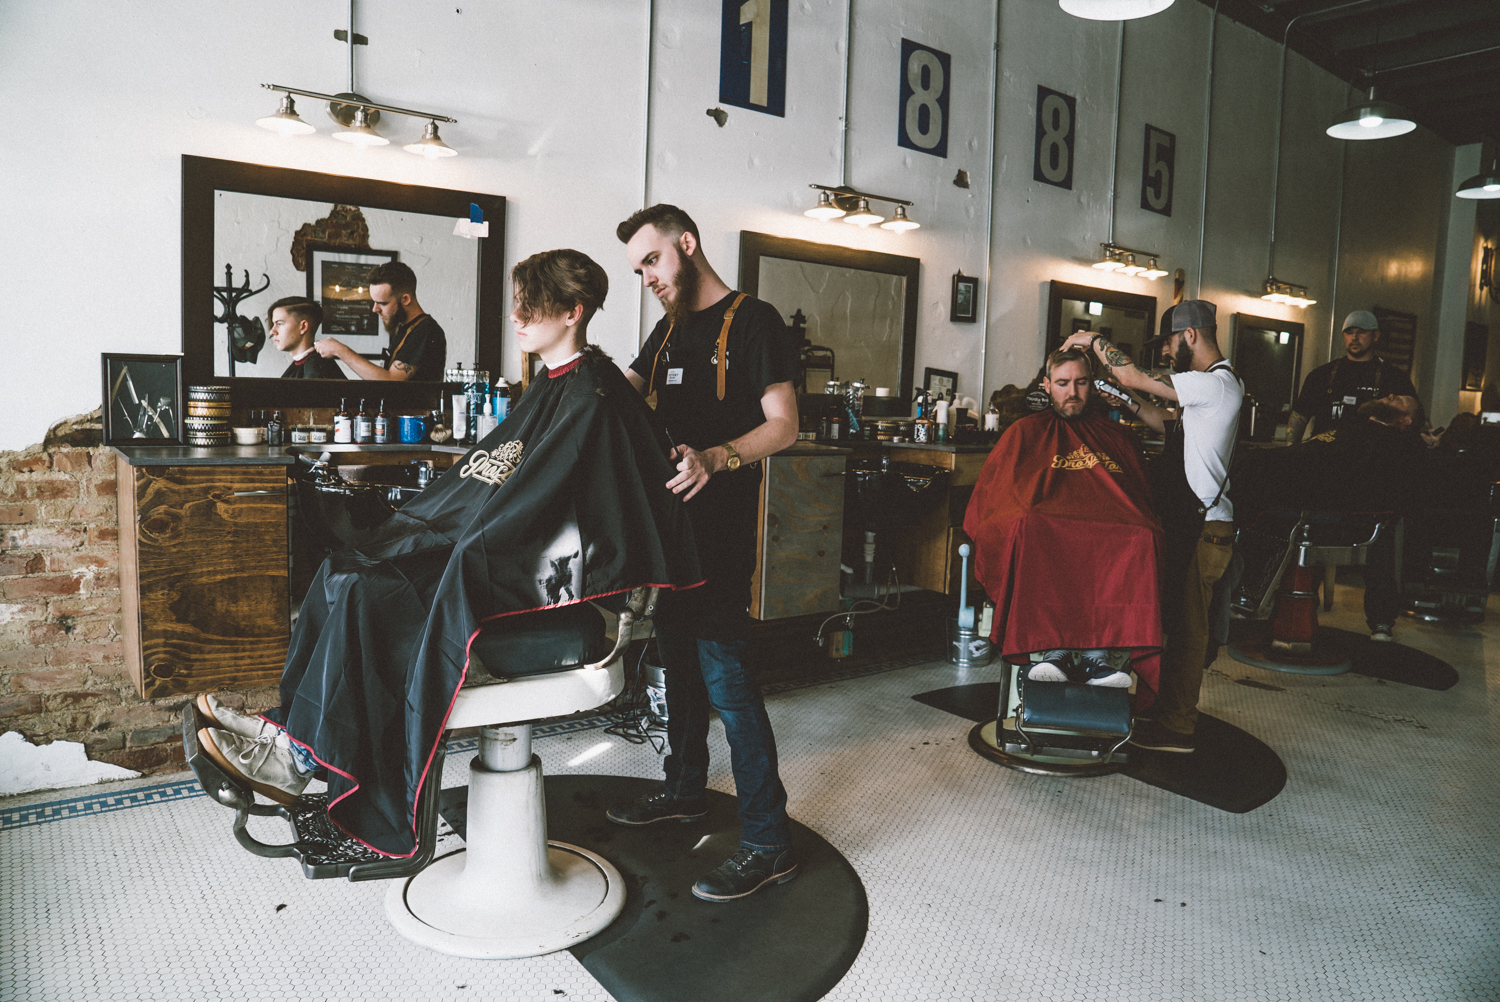 APPOINTMENTS — 1885 Barbershop